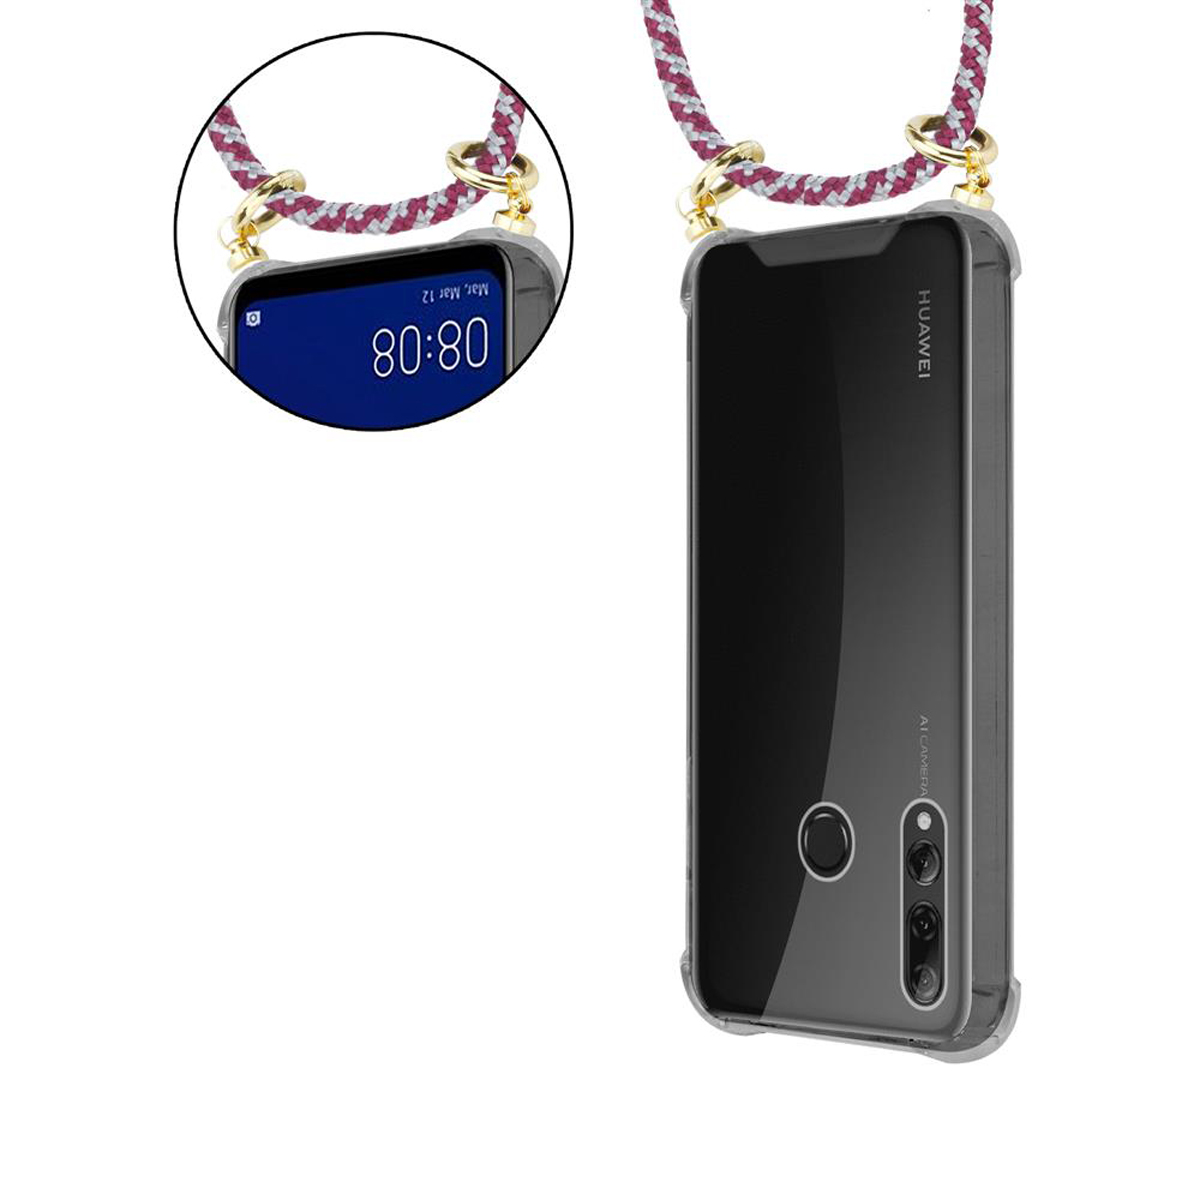 CADORABO Handy Kette mit Huawei, WEIß und Gold Hülle, P 2019, abnehmbarer Ringen, Backcover, Kordel ROT Band SMART PLUS